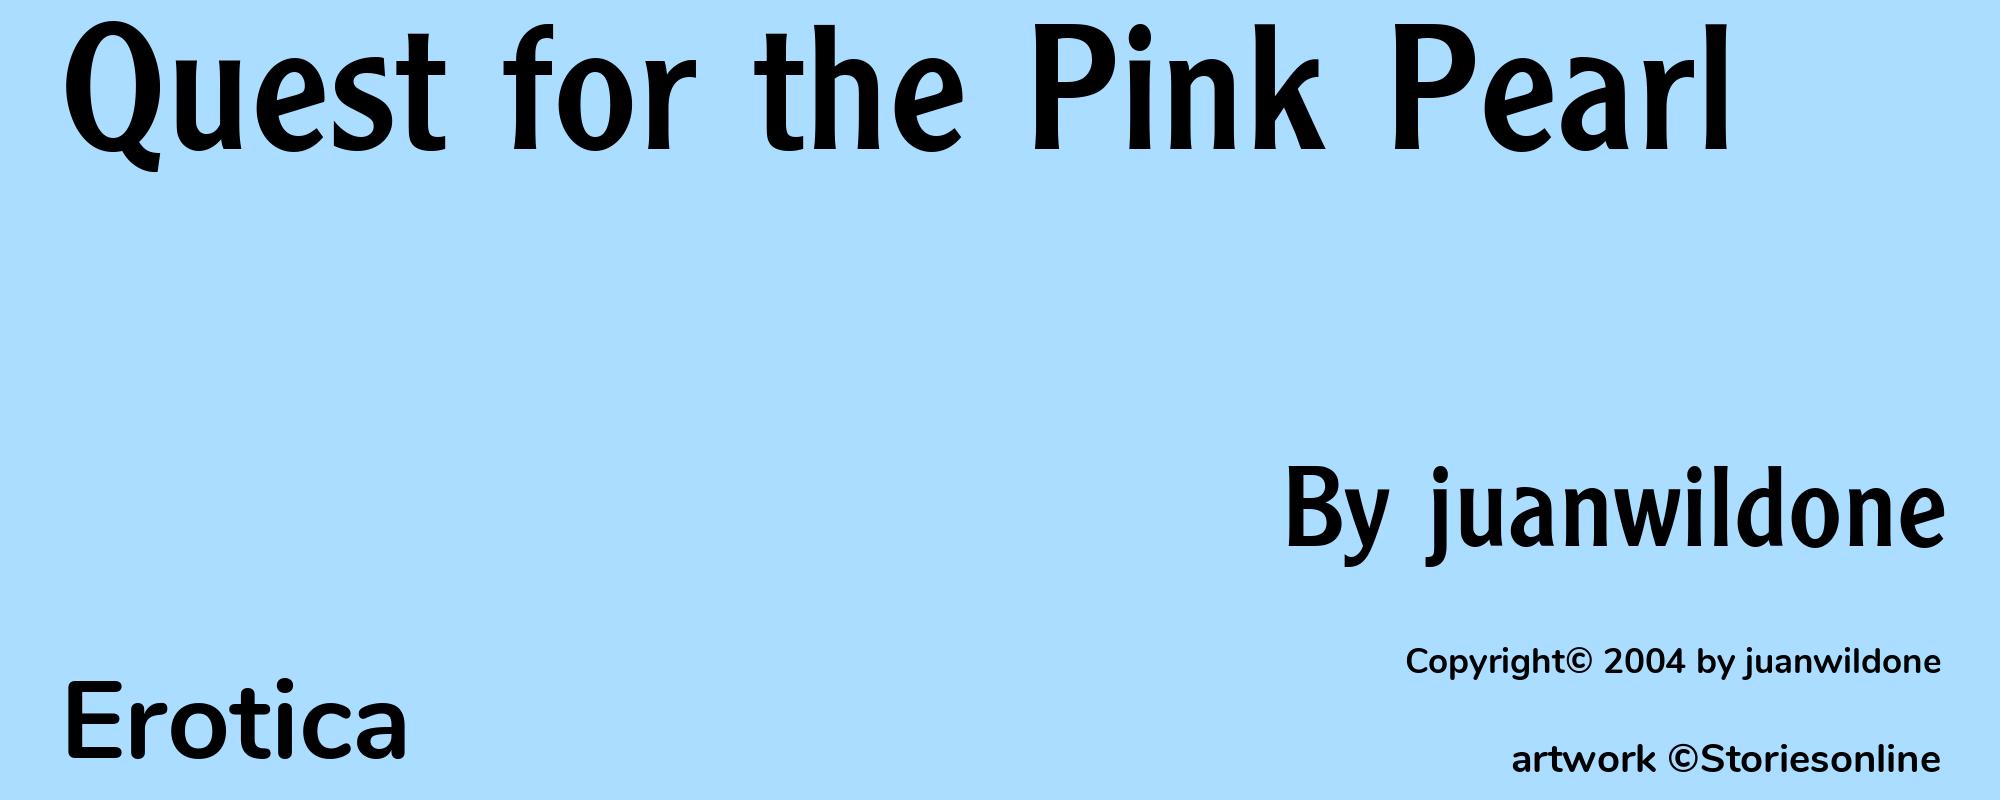 Quest for the Pink Pearl - Cover